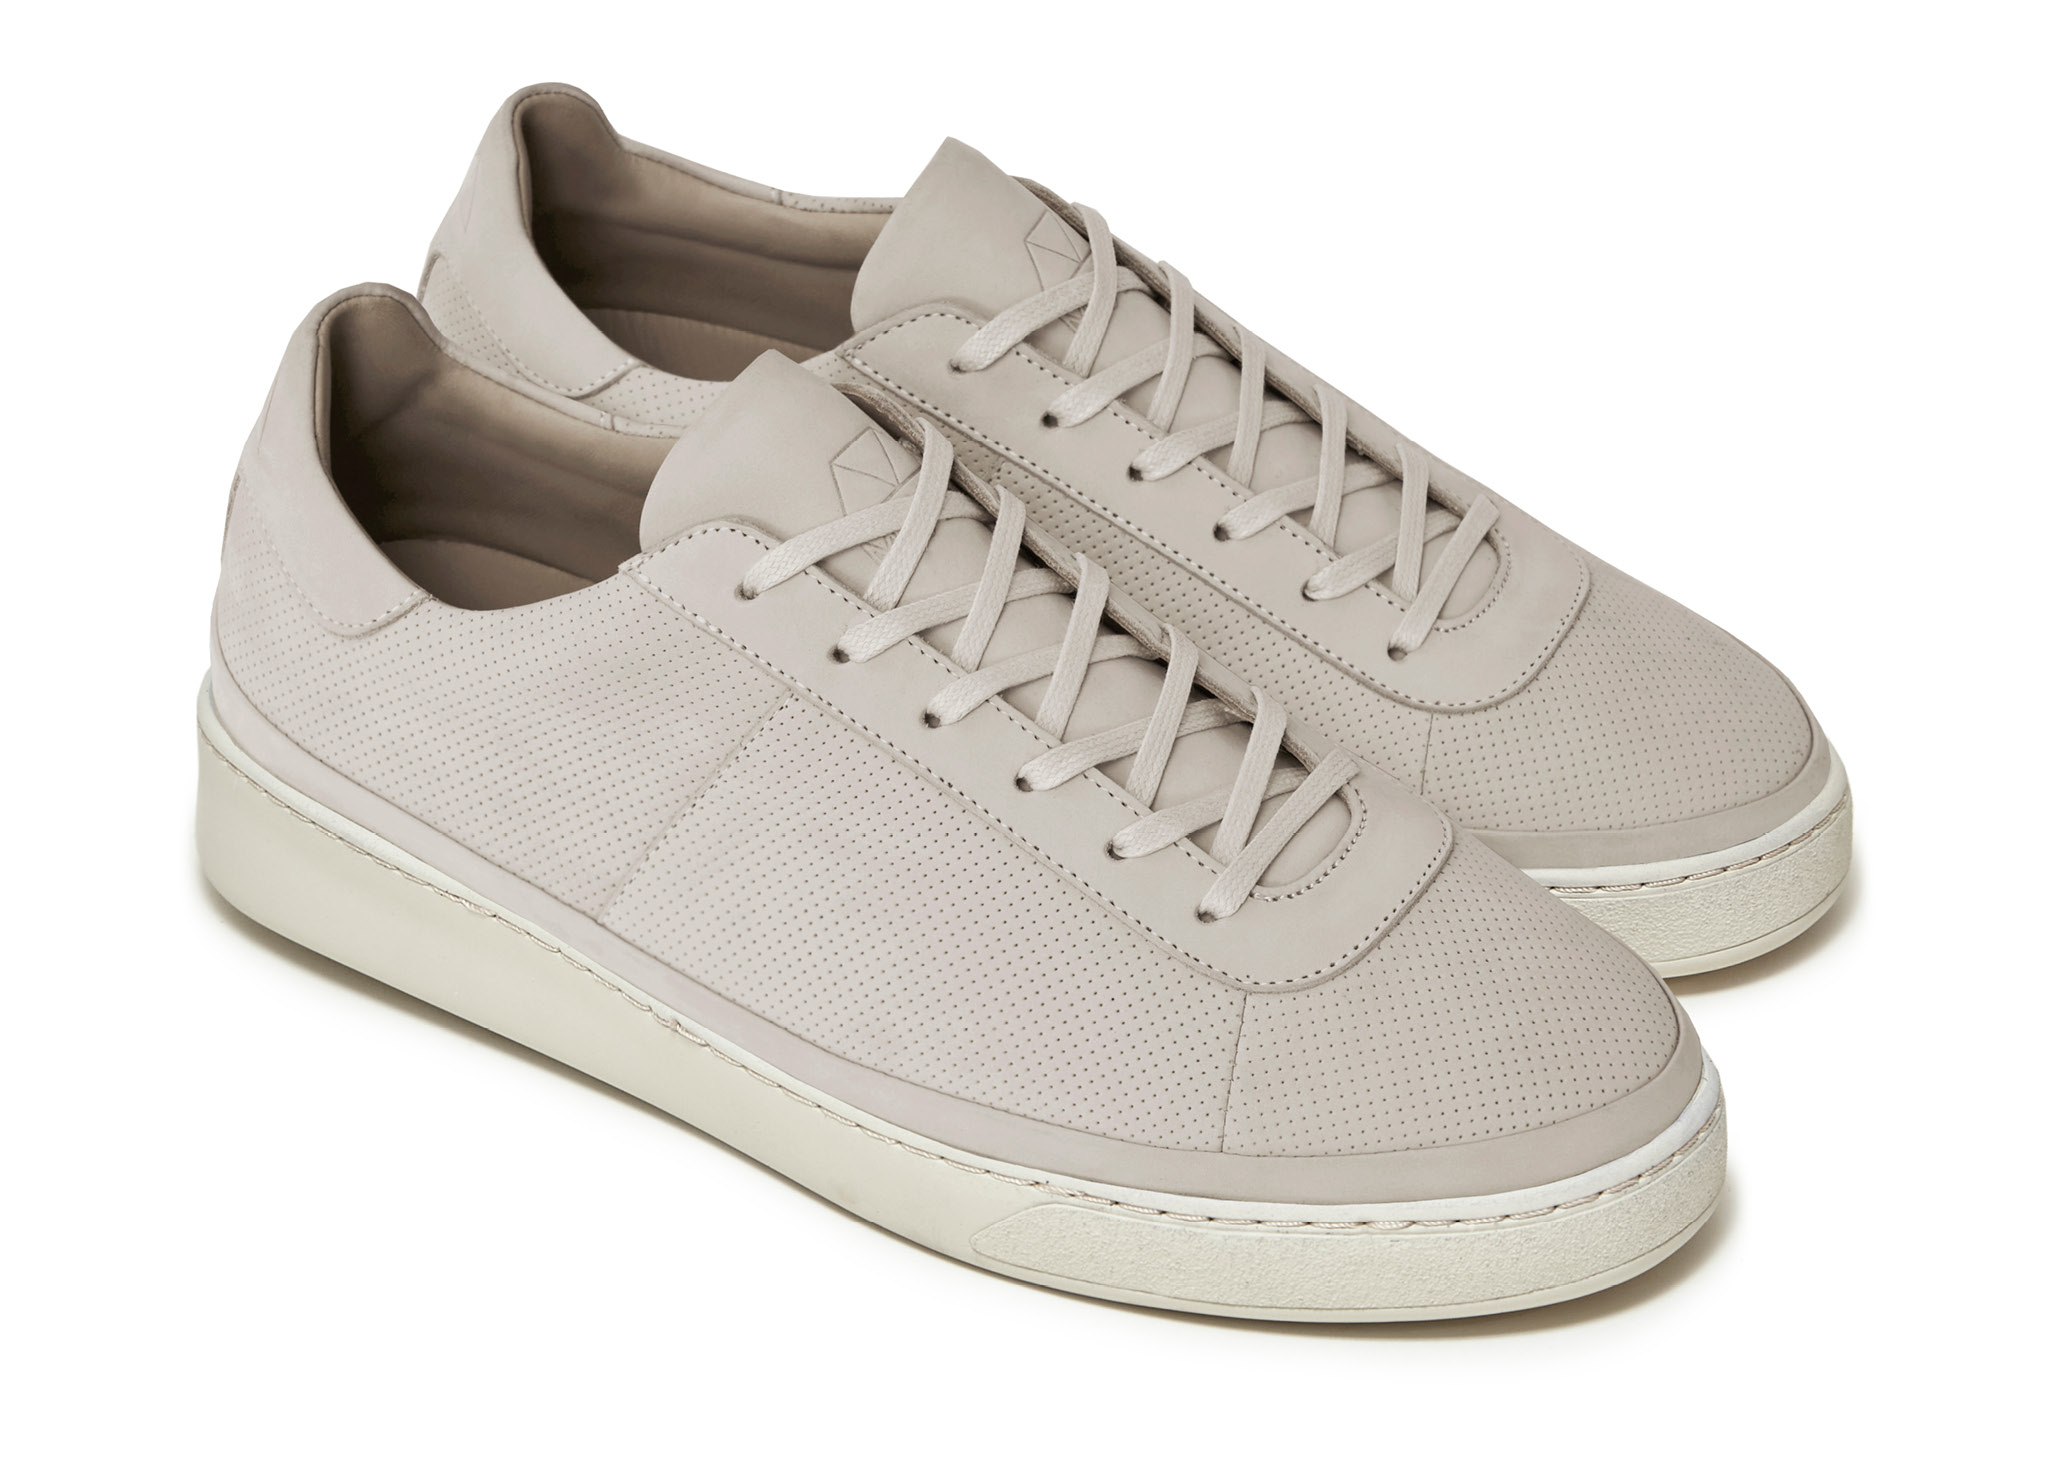 Mens Sneakers Perforated Cream Nubuck Leather